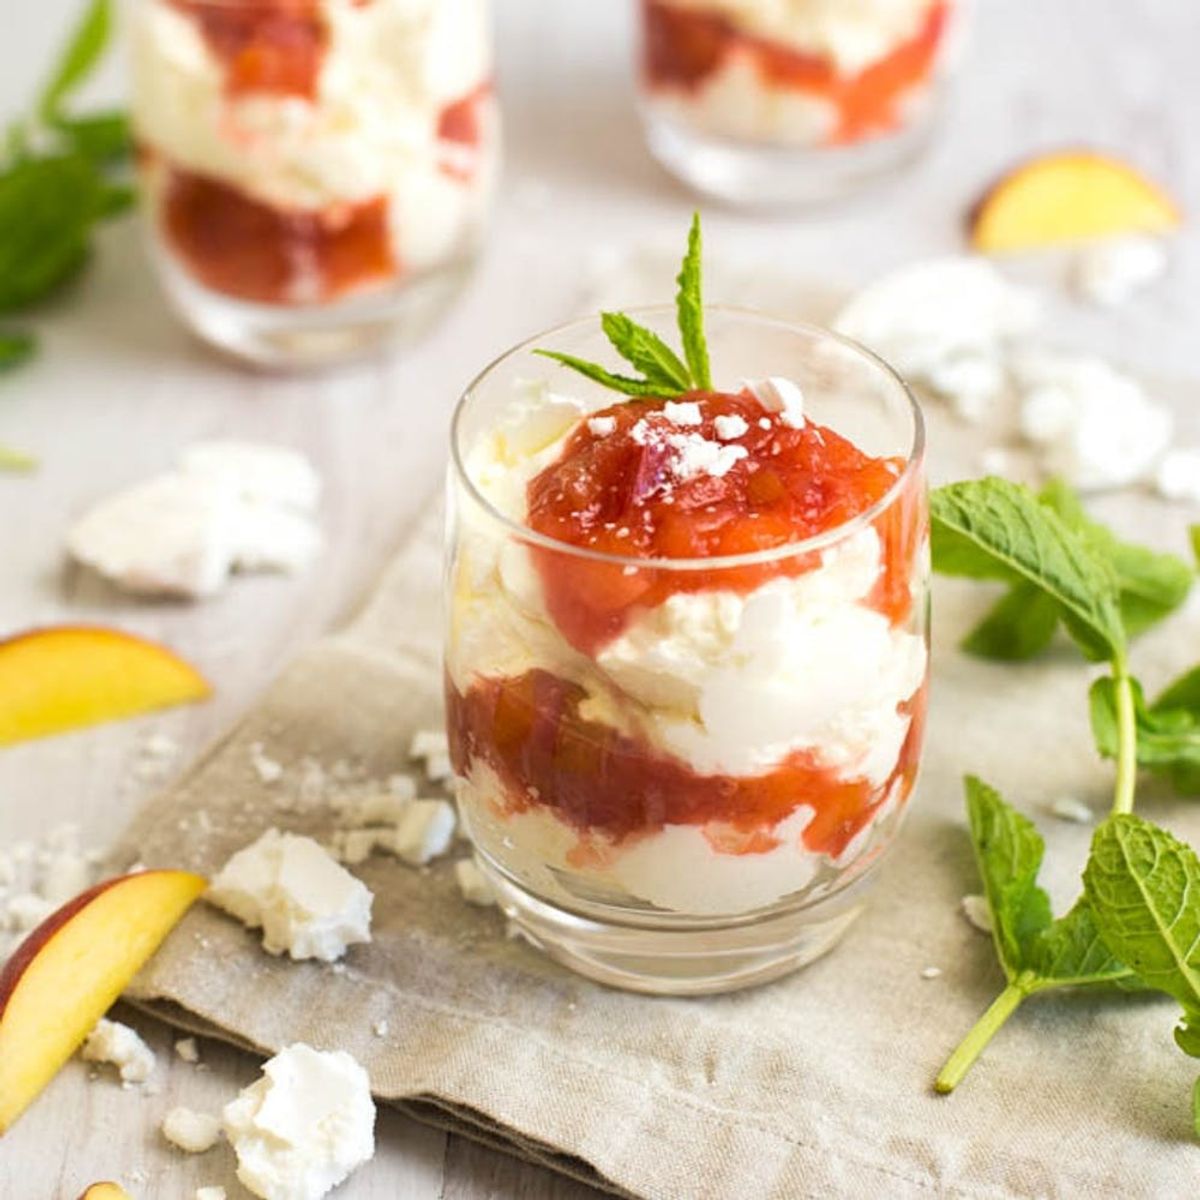 If You’re an Untidy Cook, Try This Peaches and Cream Eton Mess!